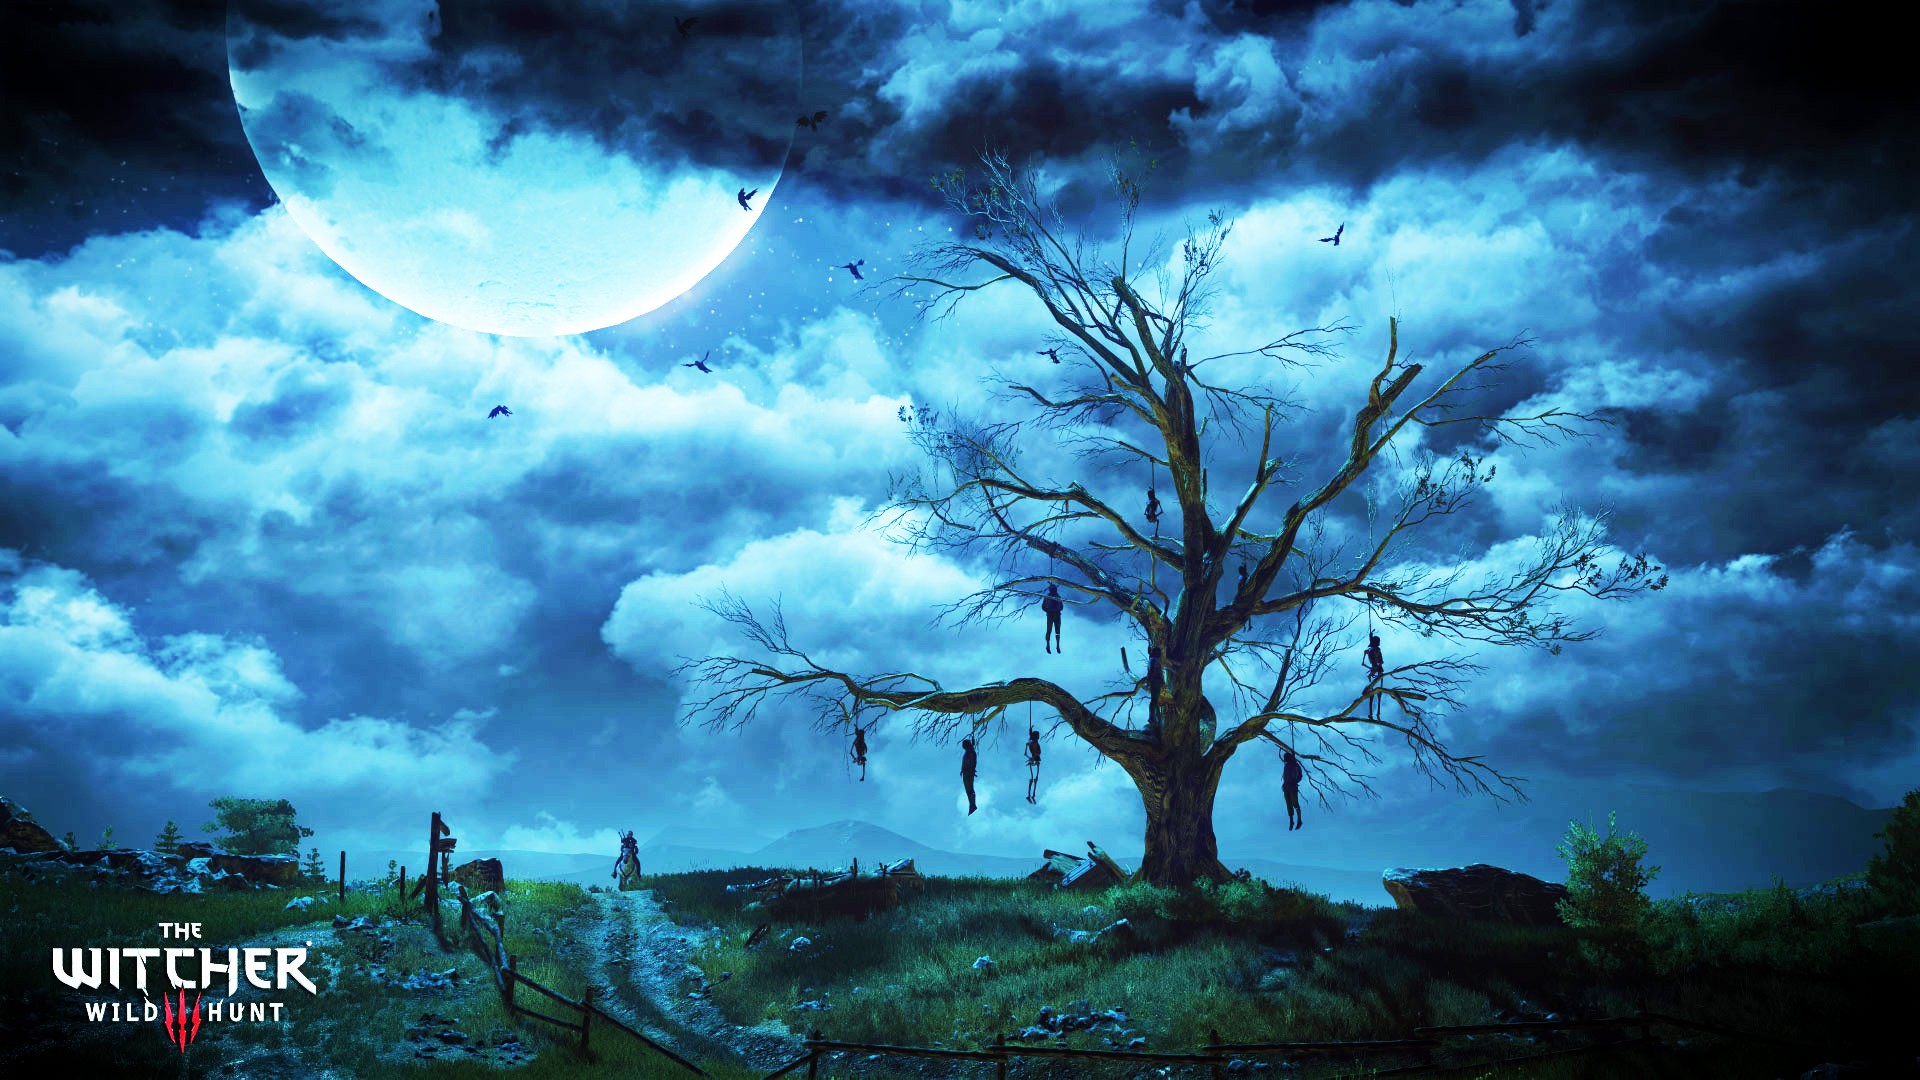 video Games, The Witcher 3: Wild Hunt, The Witcher, Trees, Moon, Clouds